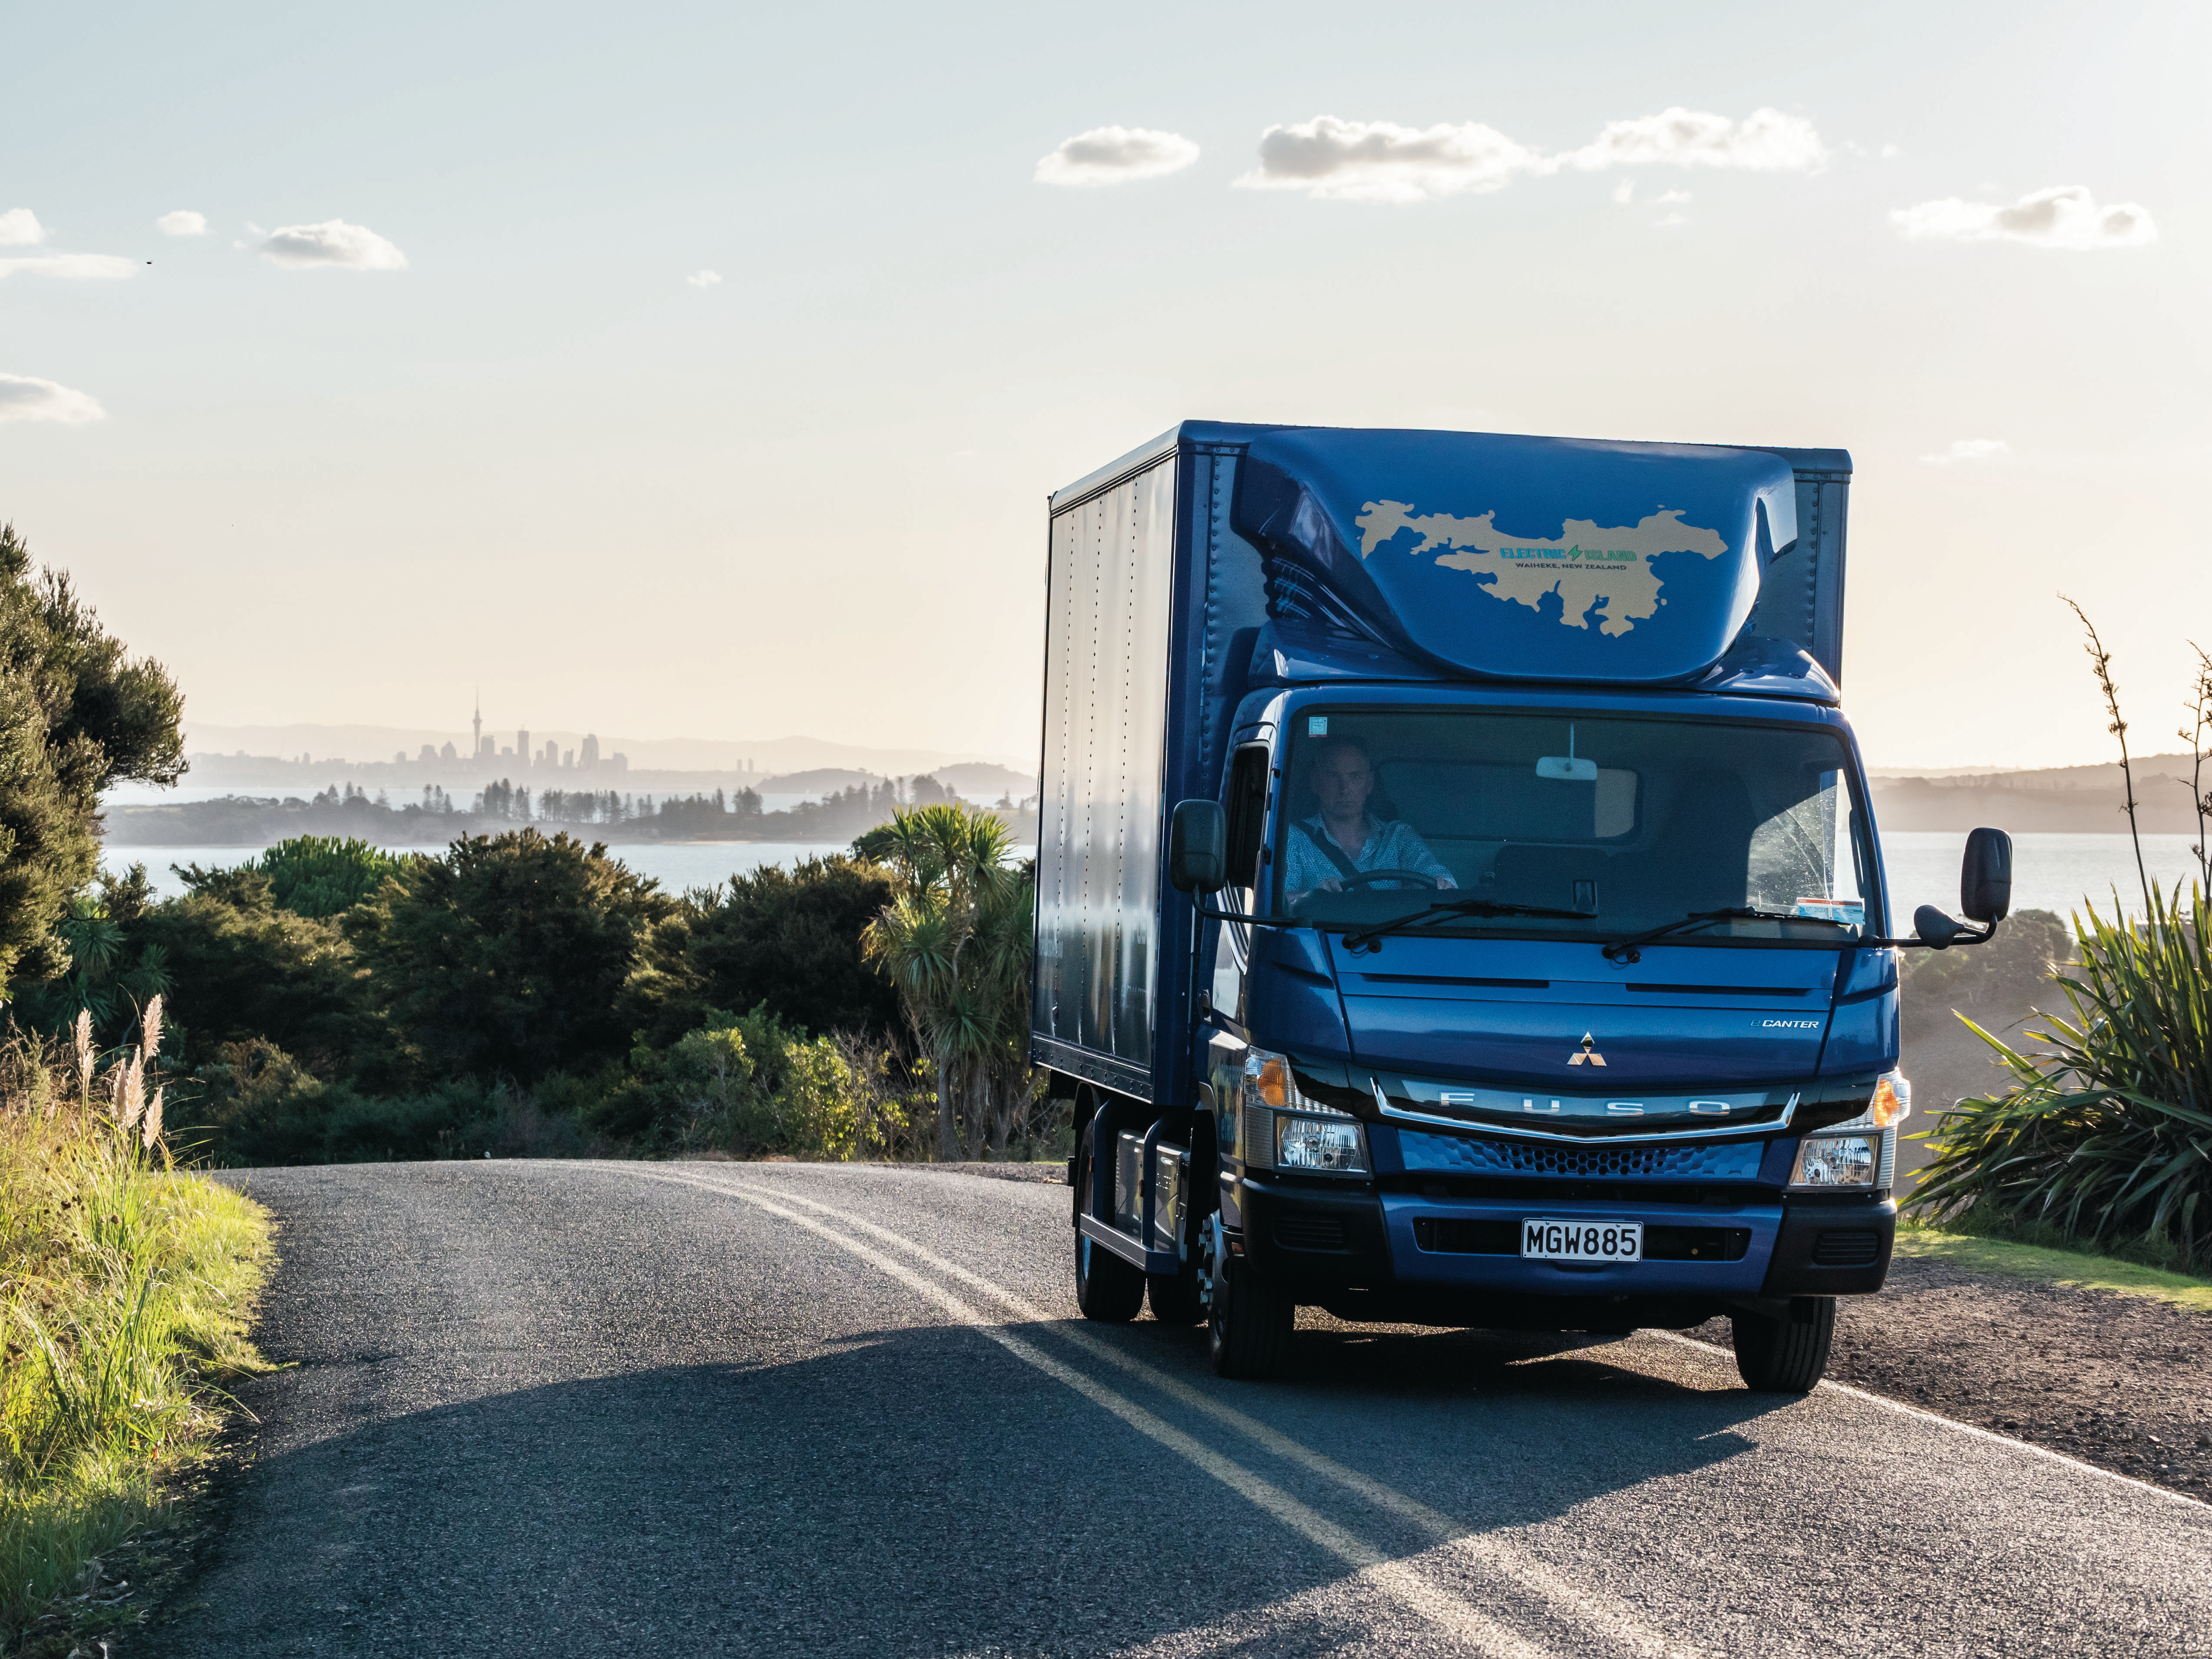 Reliable On Five Continents: FUSO ECanter Travels The World To Promote All Electric Urban Delivery